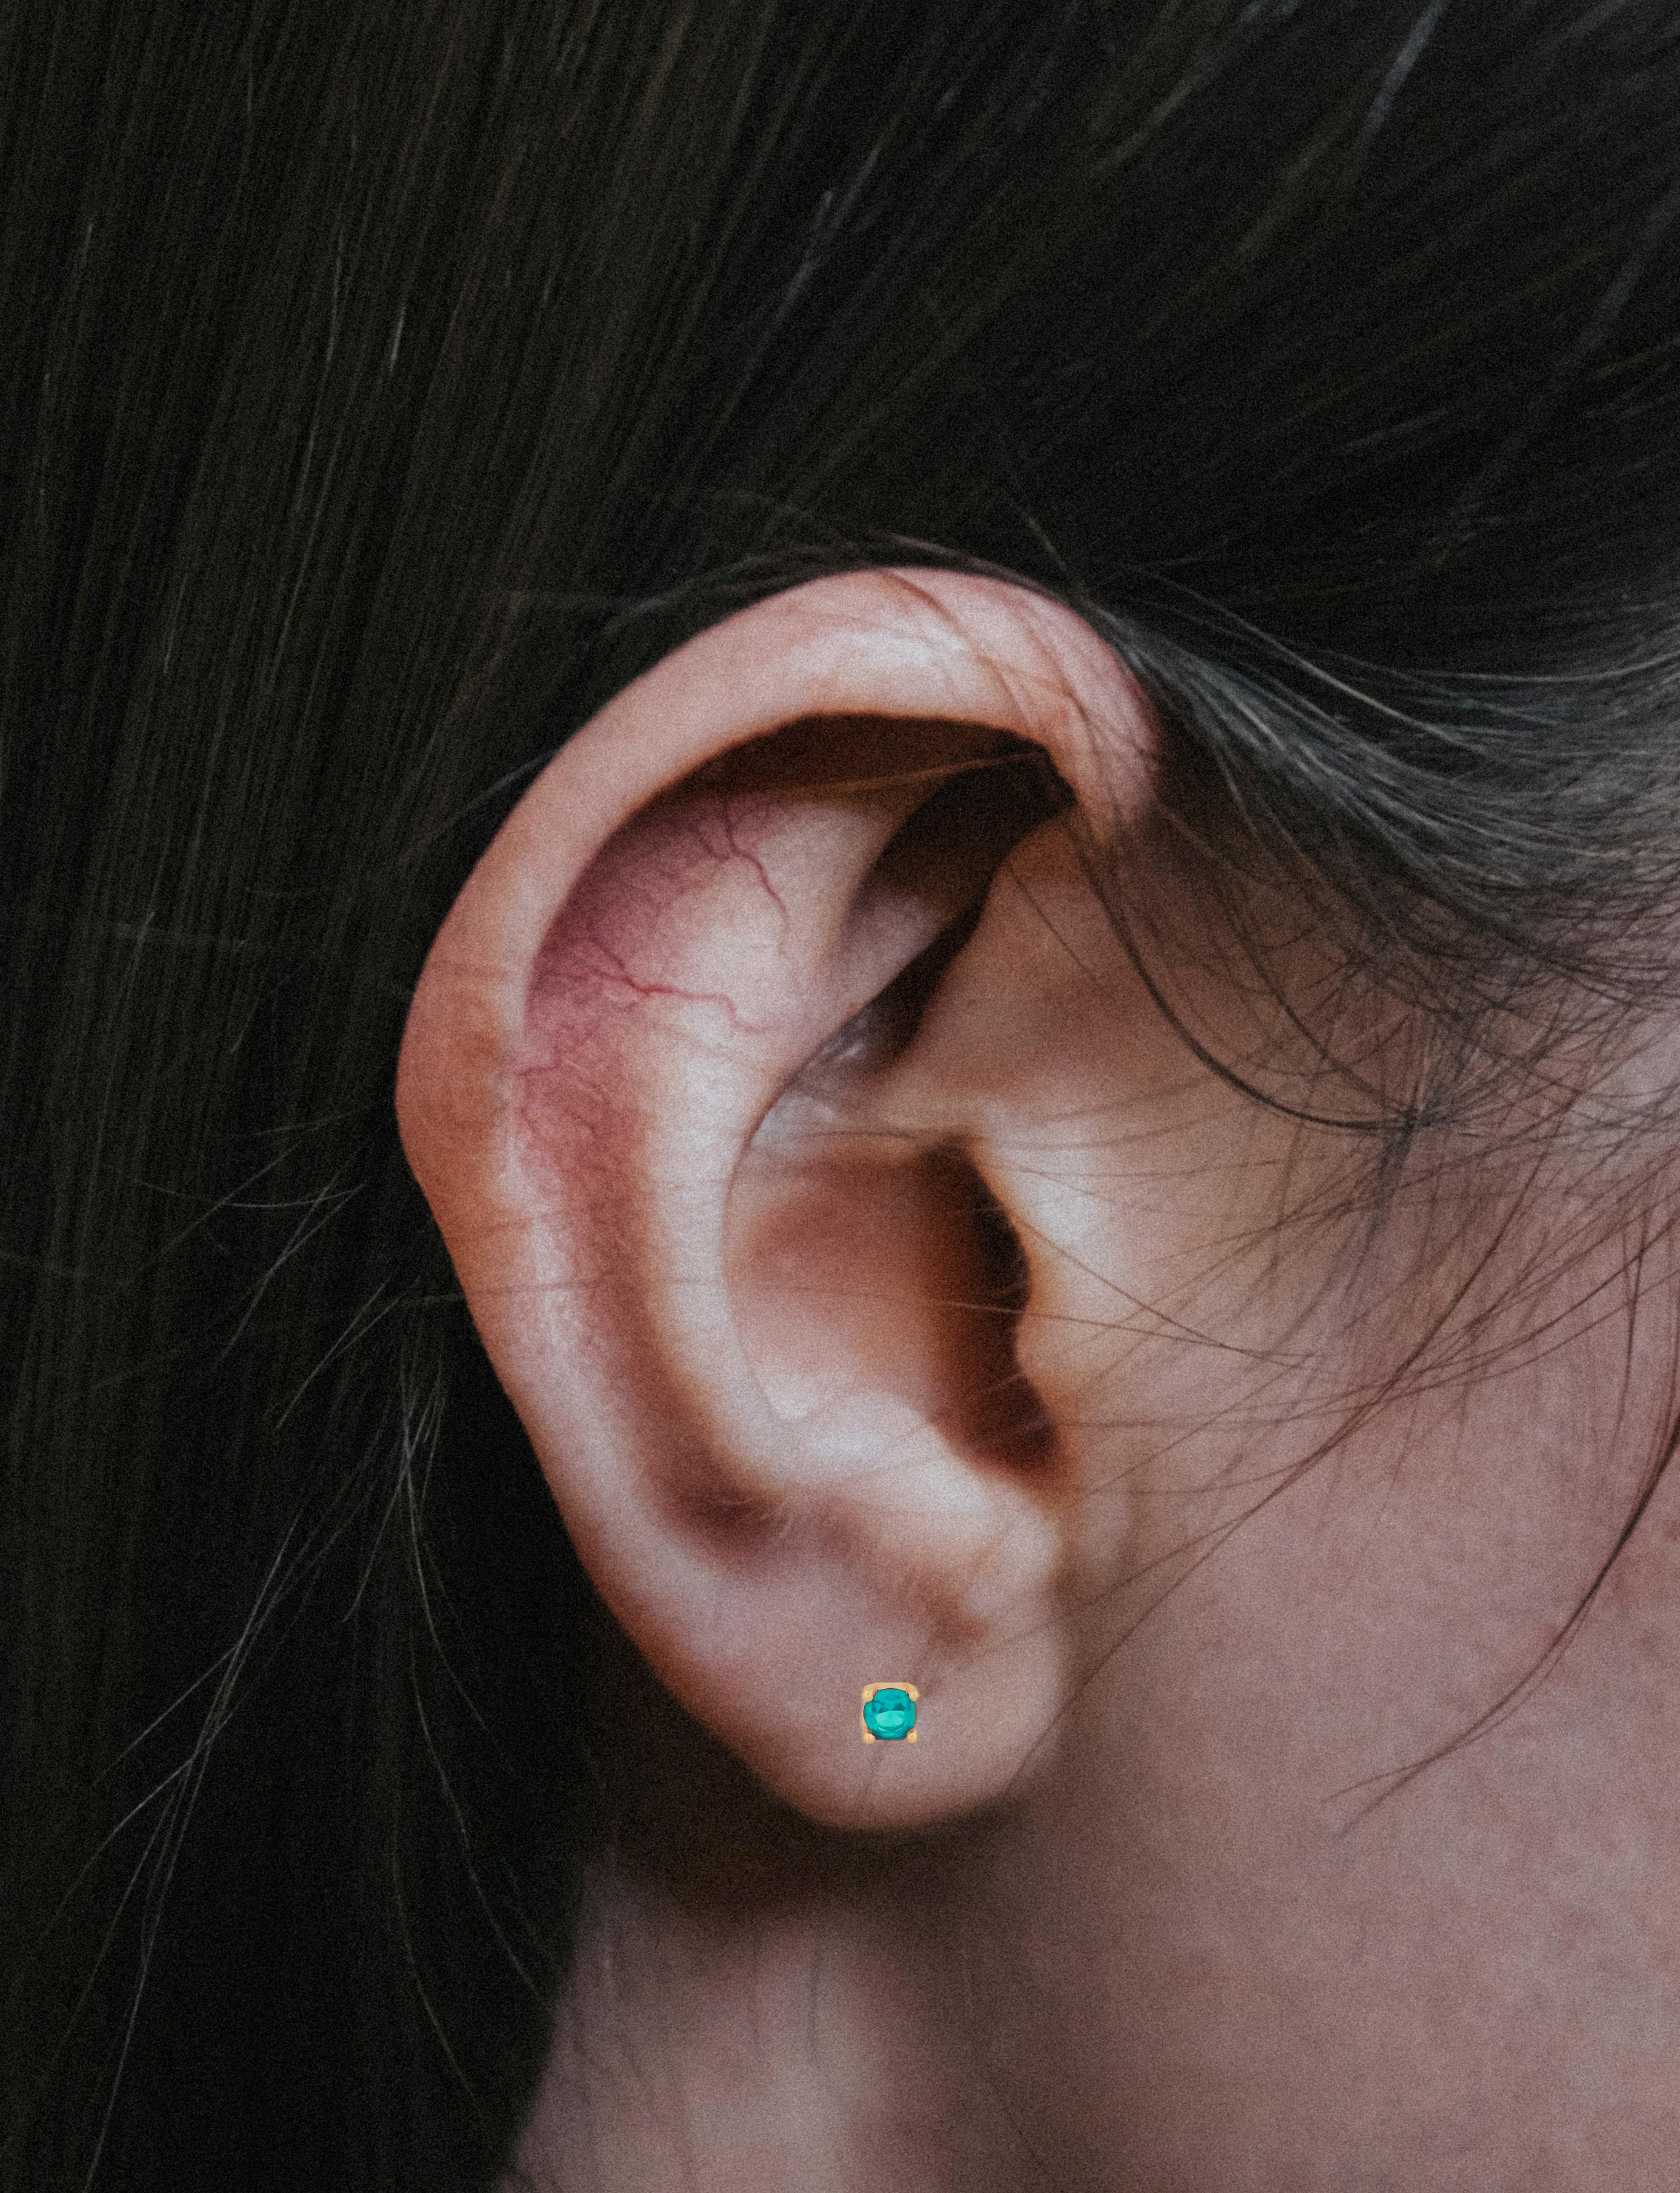 14 ct Gold Lab Paraiba Stud Earrings.  
3 mm paraiba earrings. Blue gemstone earrings. Small delicate gold earrings studs. Four prong studs. Minimalist paraiba earrings.

Metal: 14k solid gold
Weight: 1.5 gr.
Earrings goes with gold